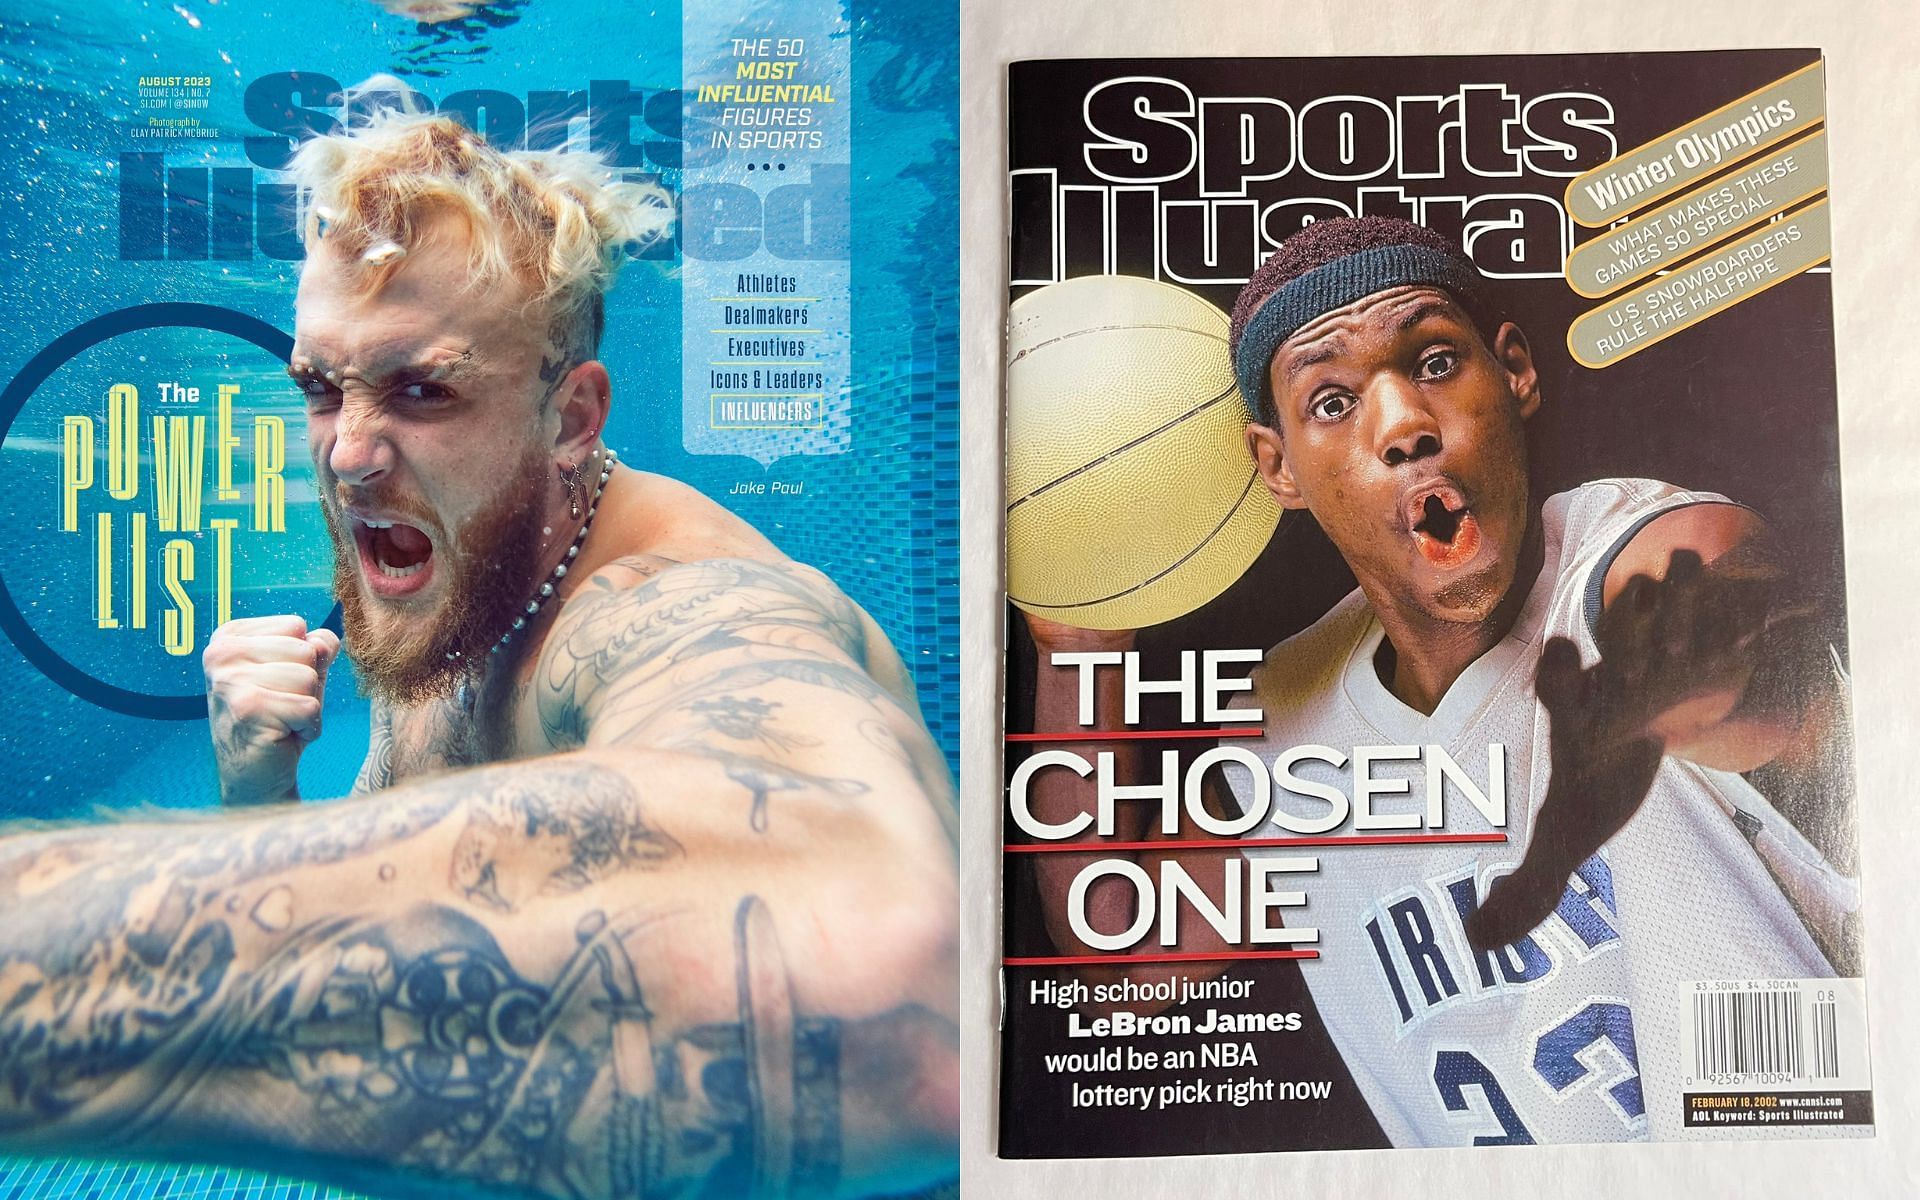 Jake Paul (left) and LeBron James (right) on Sports Illustrated cover [Image credits: @MostVpromotions and @CGC_SI on Twitter]